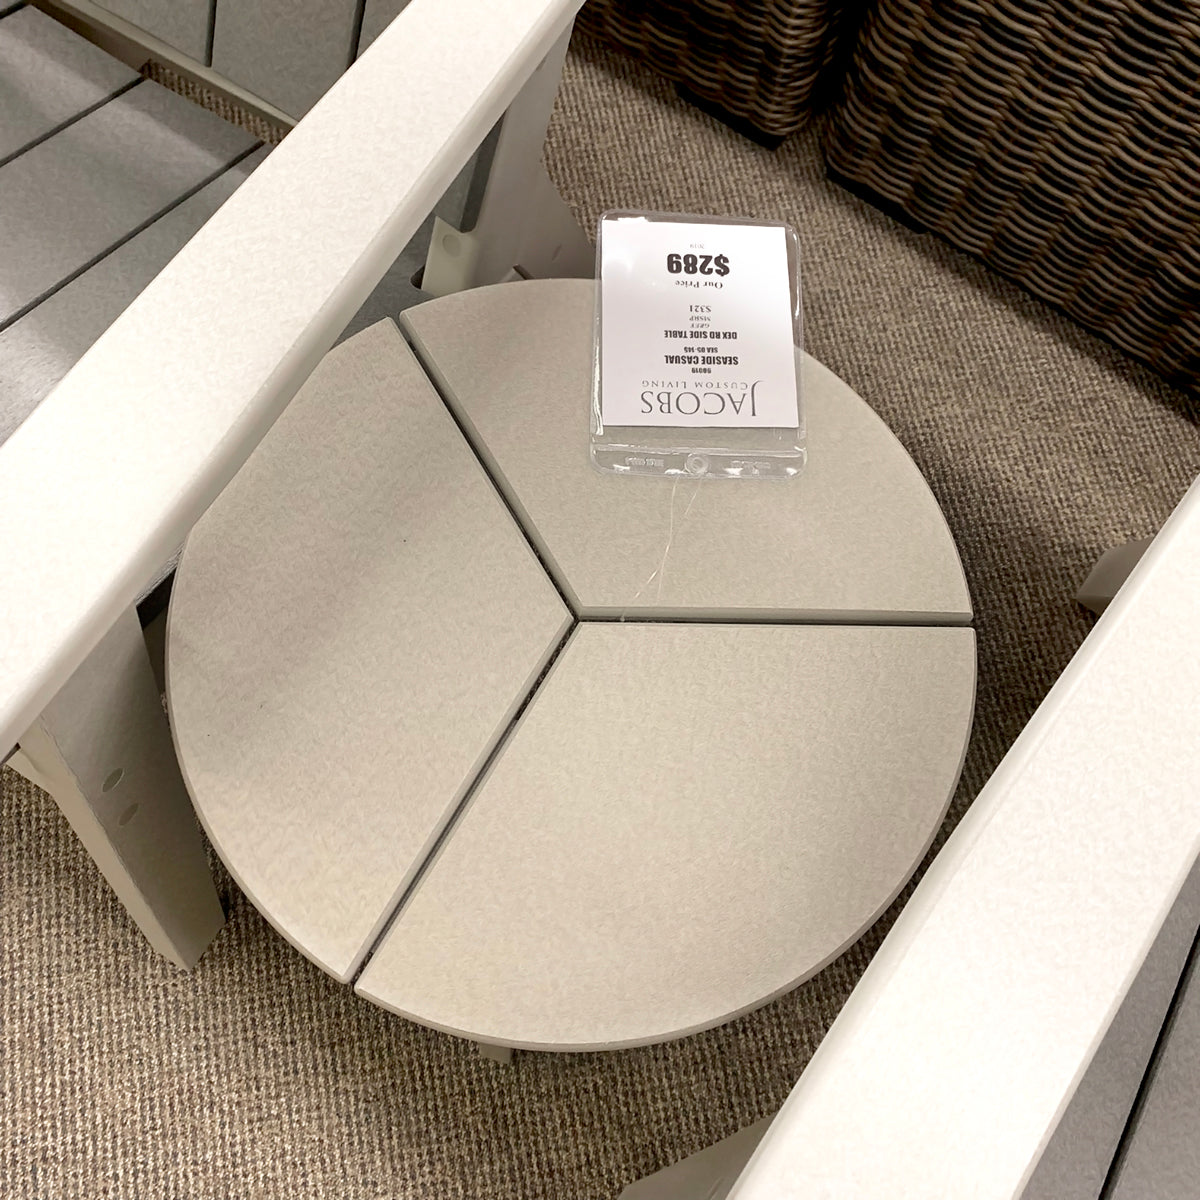 Seaside Casual Dex Patio Side Table is available in our Jacobs Custom Living Spokane Valley Showroom.